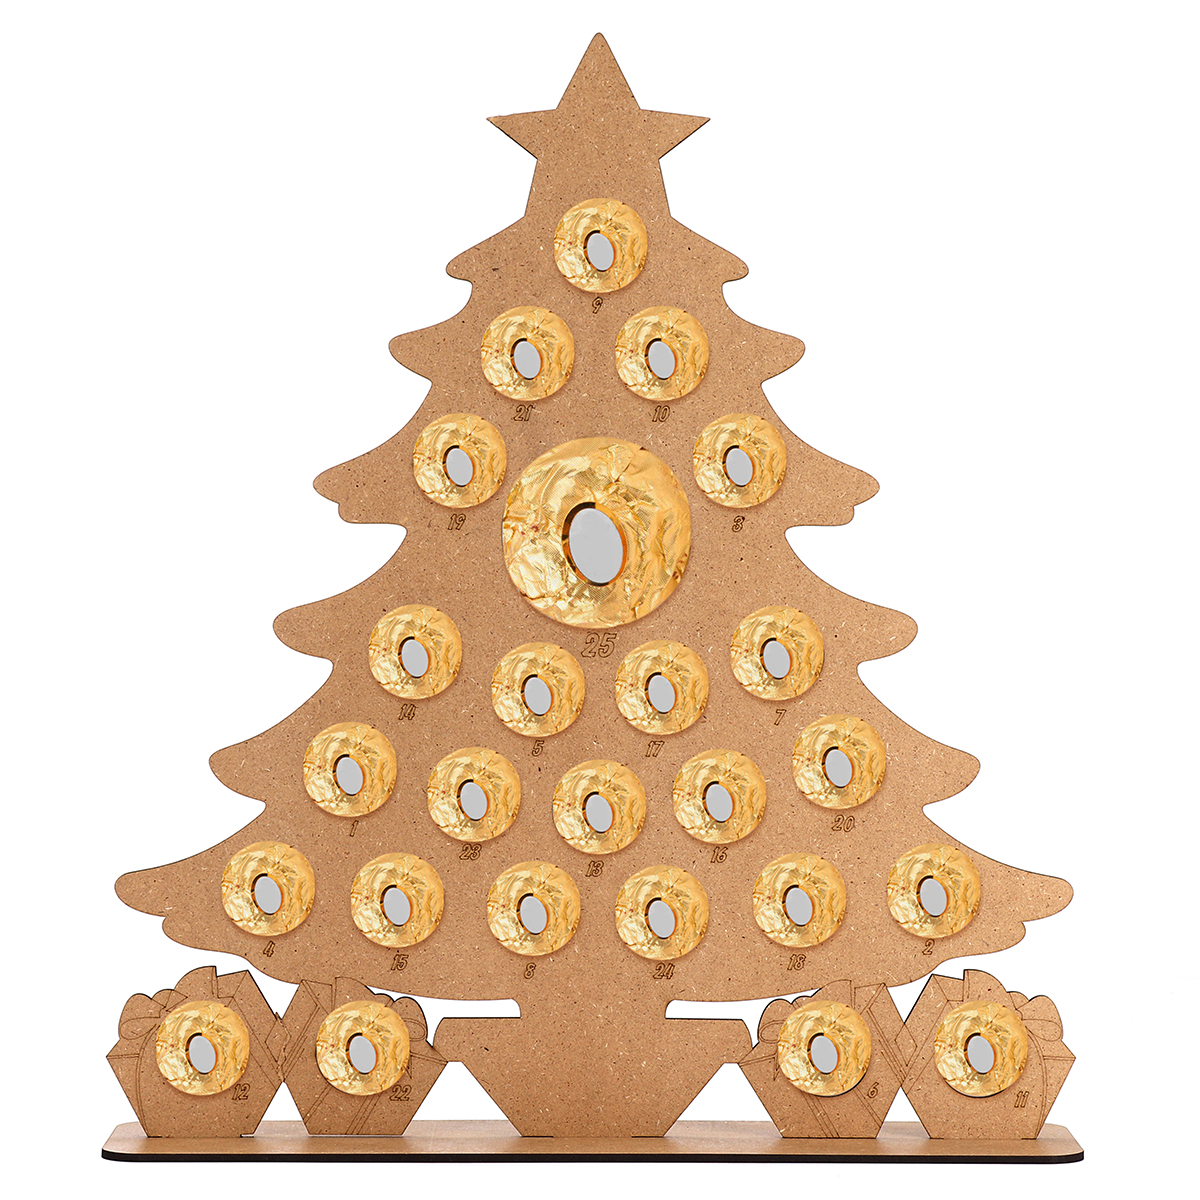 Wooden-Christmas-Advent-Calendar-Christmas-Tree-Decoration-Fits-25-Circular-Chocolates-Candy-Stand-R-1587861-10